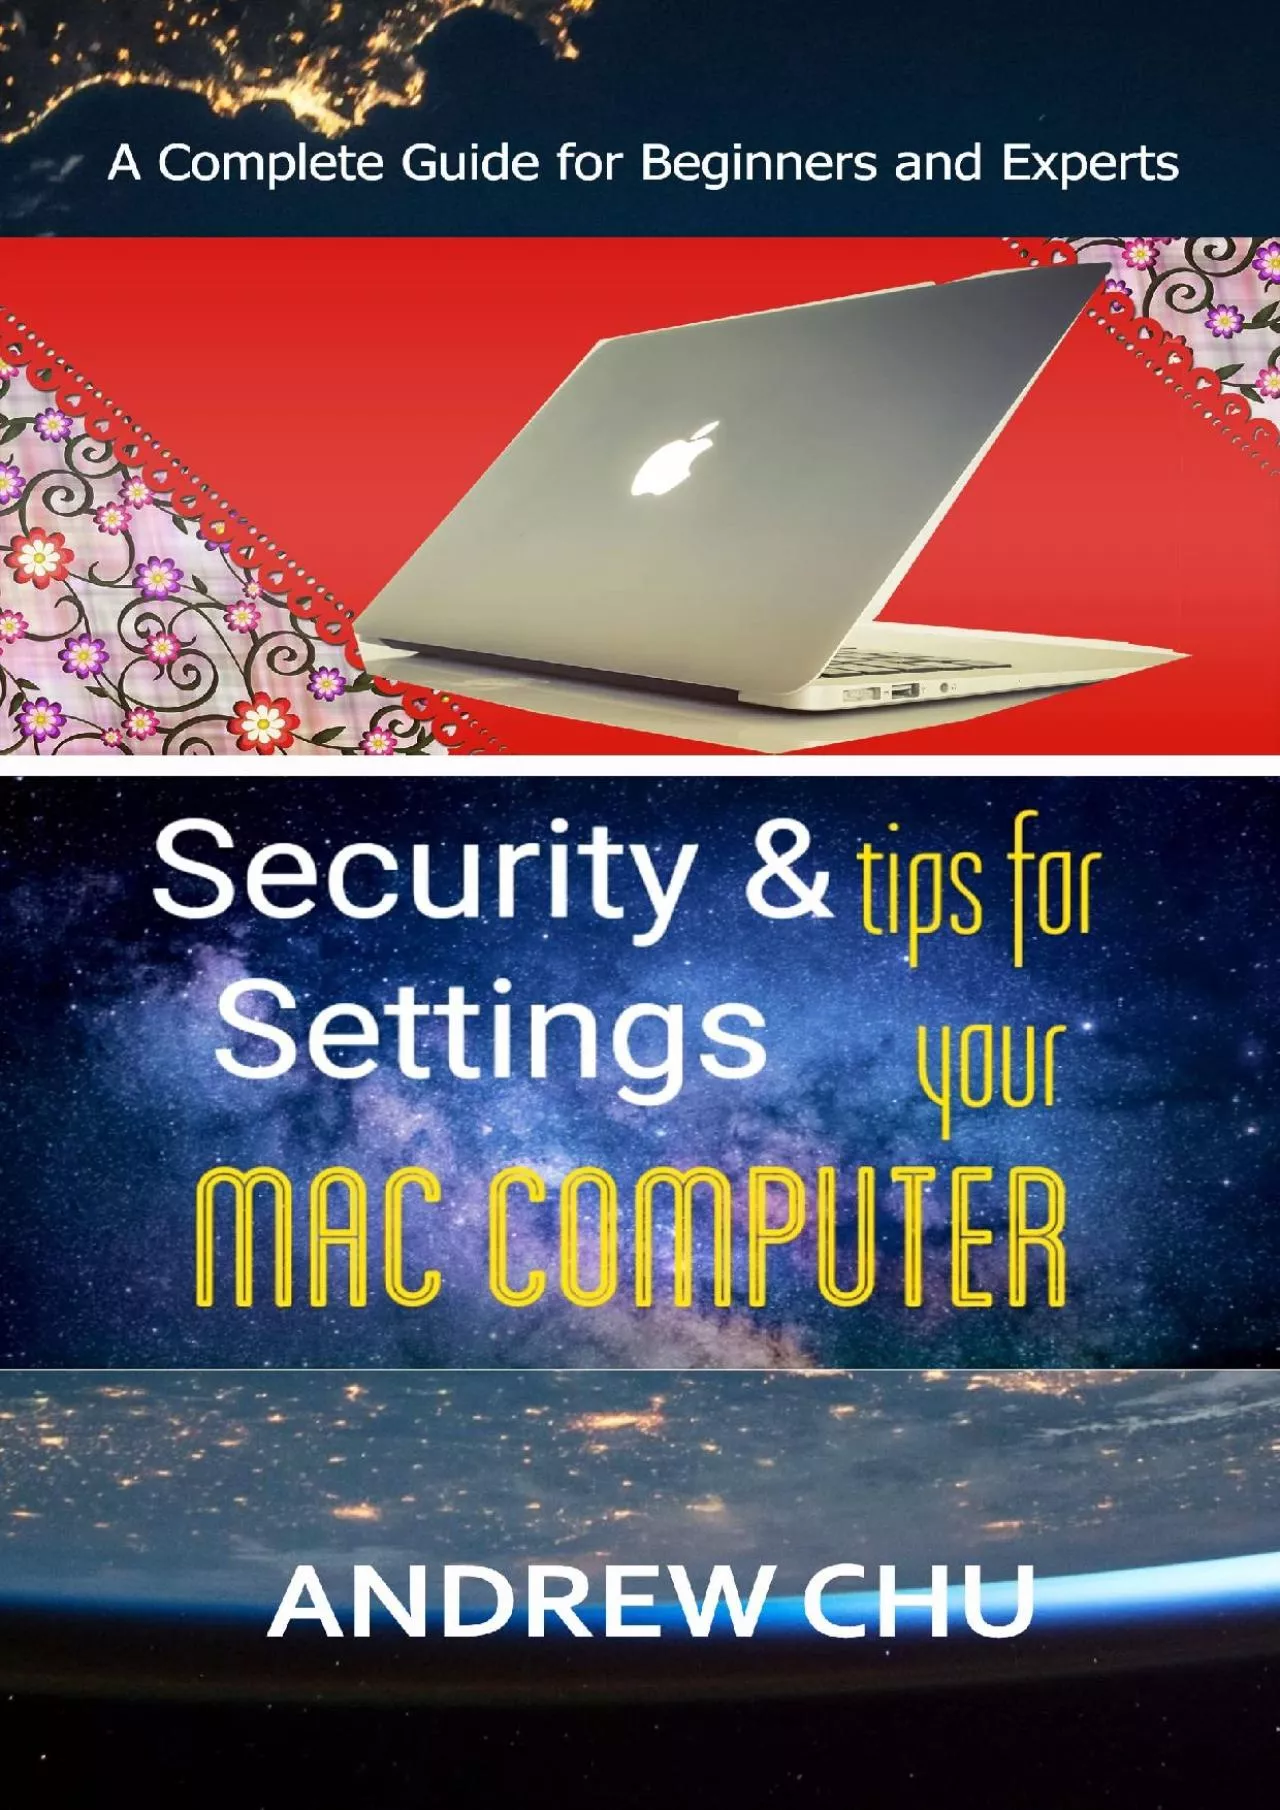 [BEST]-Security and Setting Tips for Your Mac Computer: A Complete Guide for Beginners